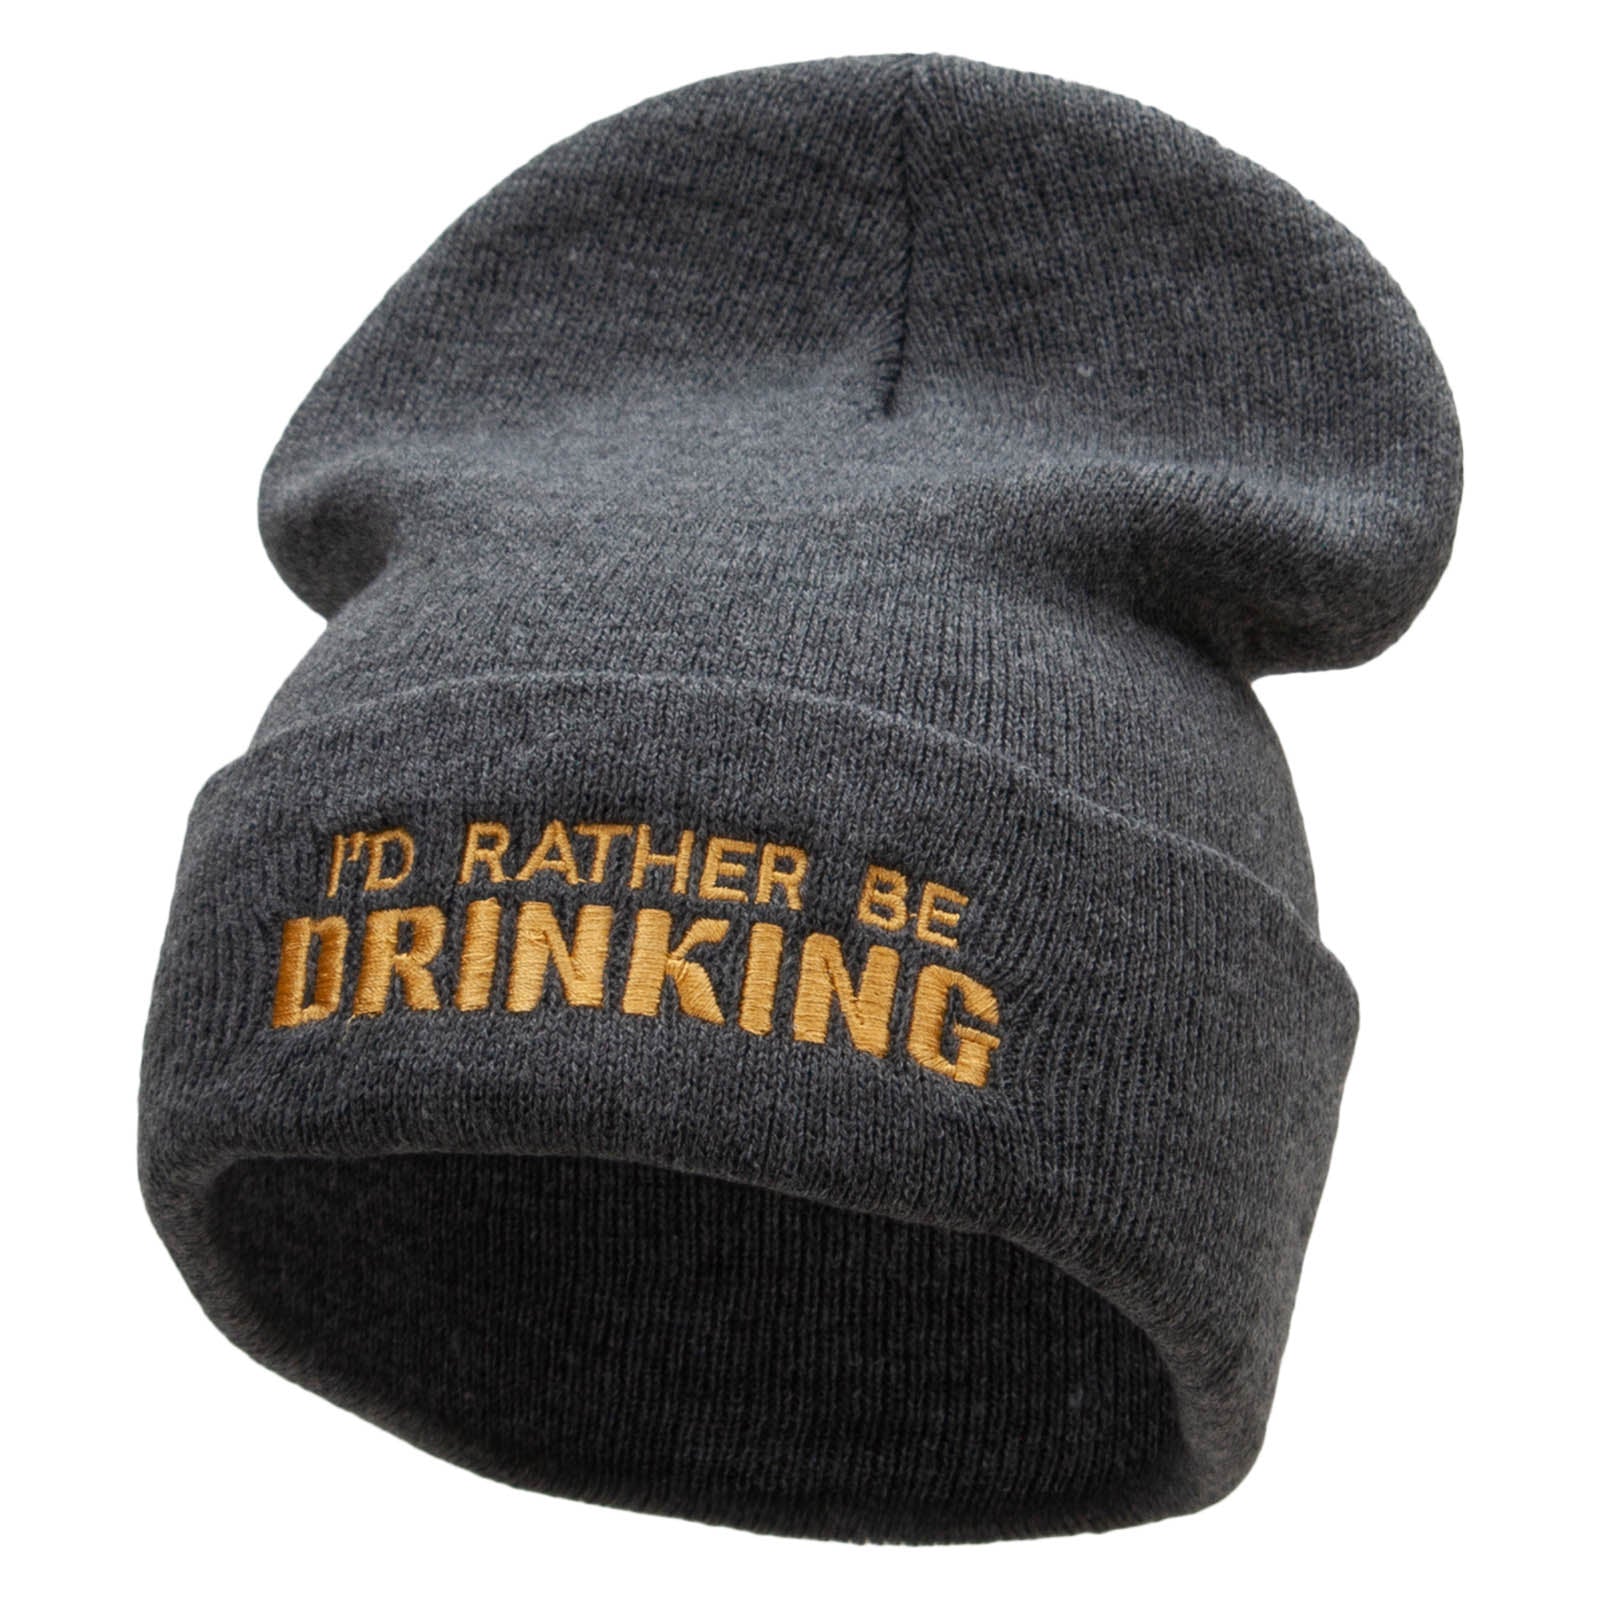 I &#039;d Rather Be Drinking Phrase Embroidered 12 Inch Long Knitted Beanie - Dk Grey OSFM